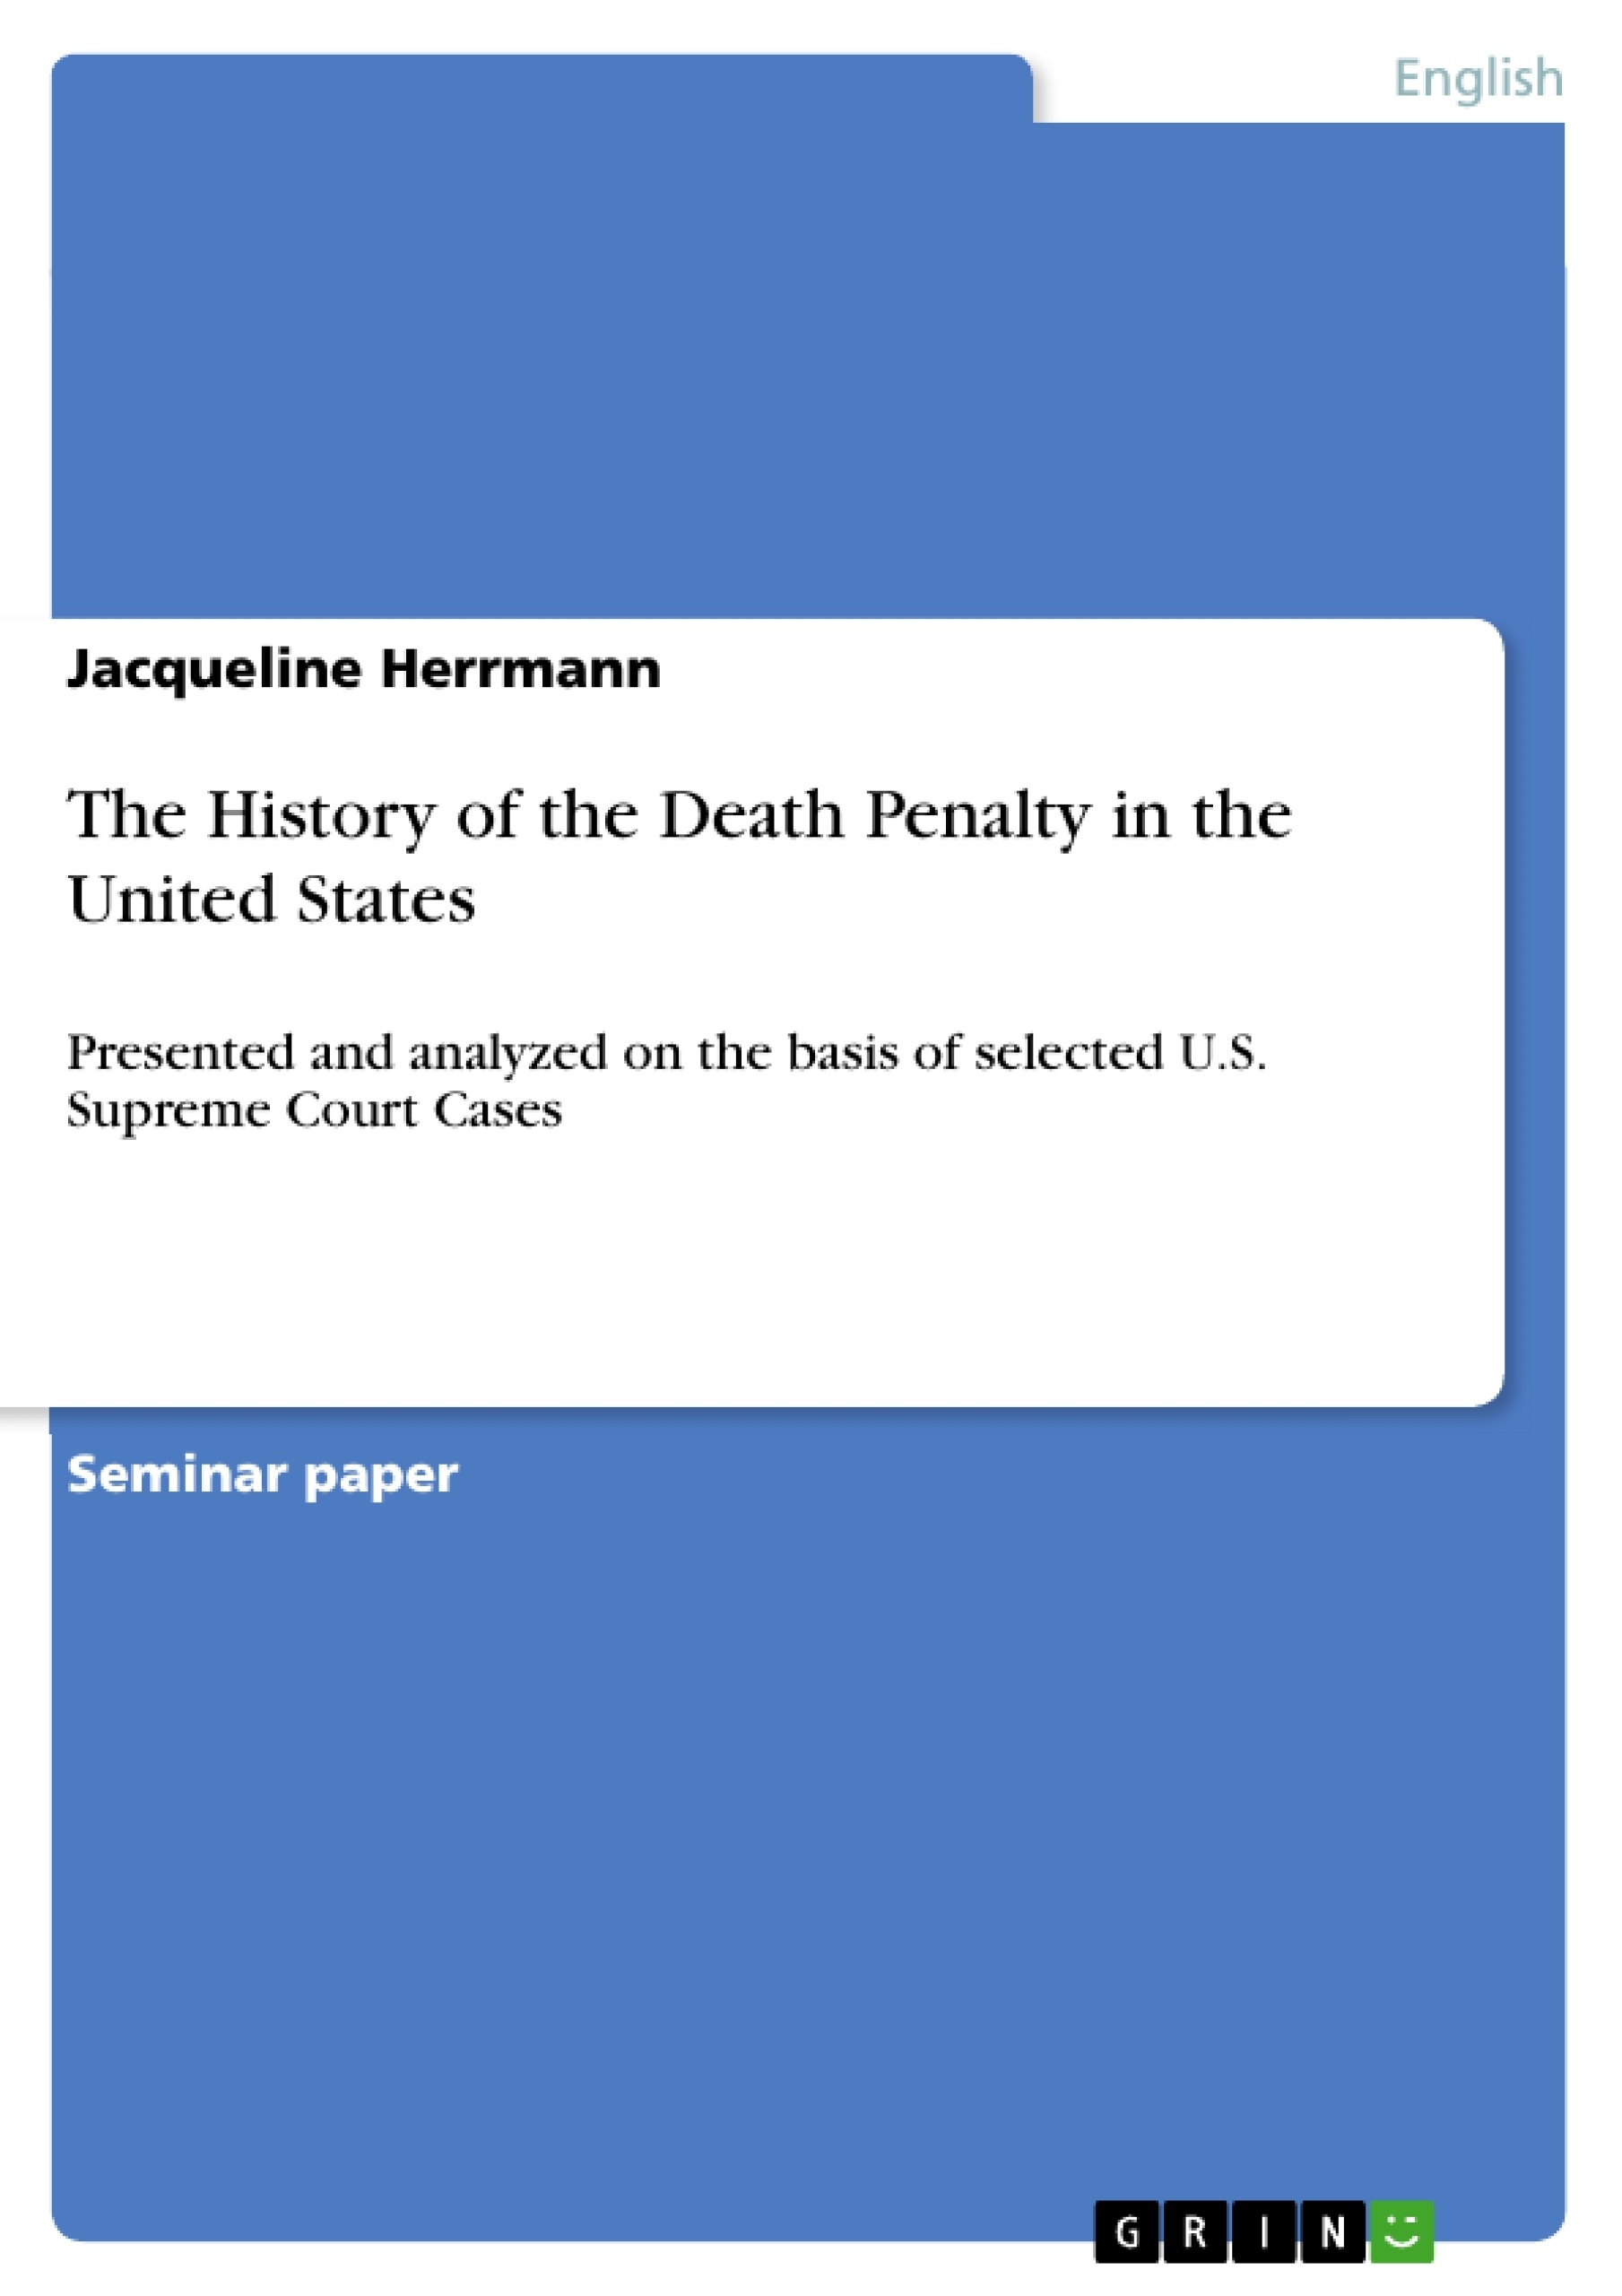 Titel: The History of the Death Penalty in the United States